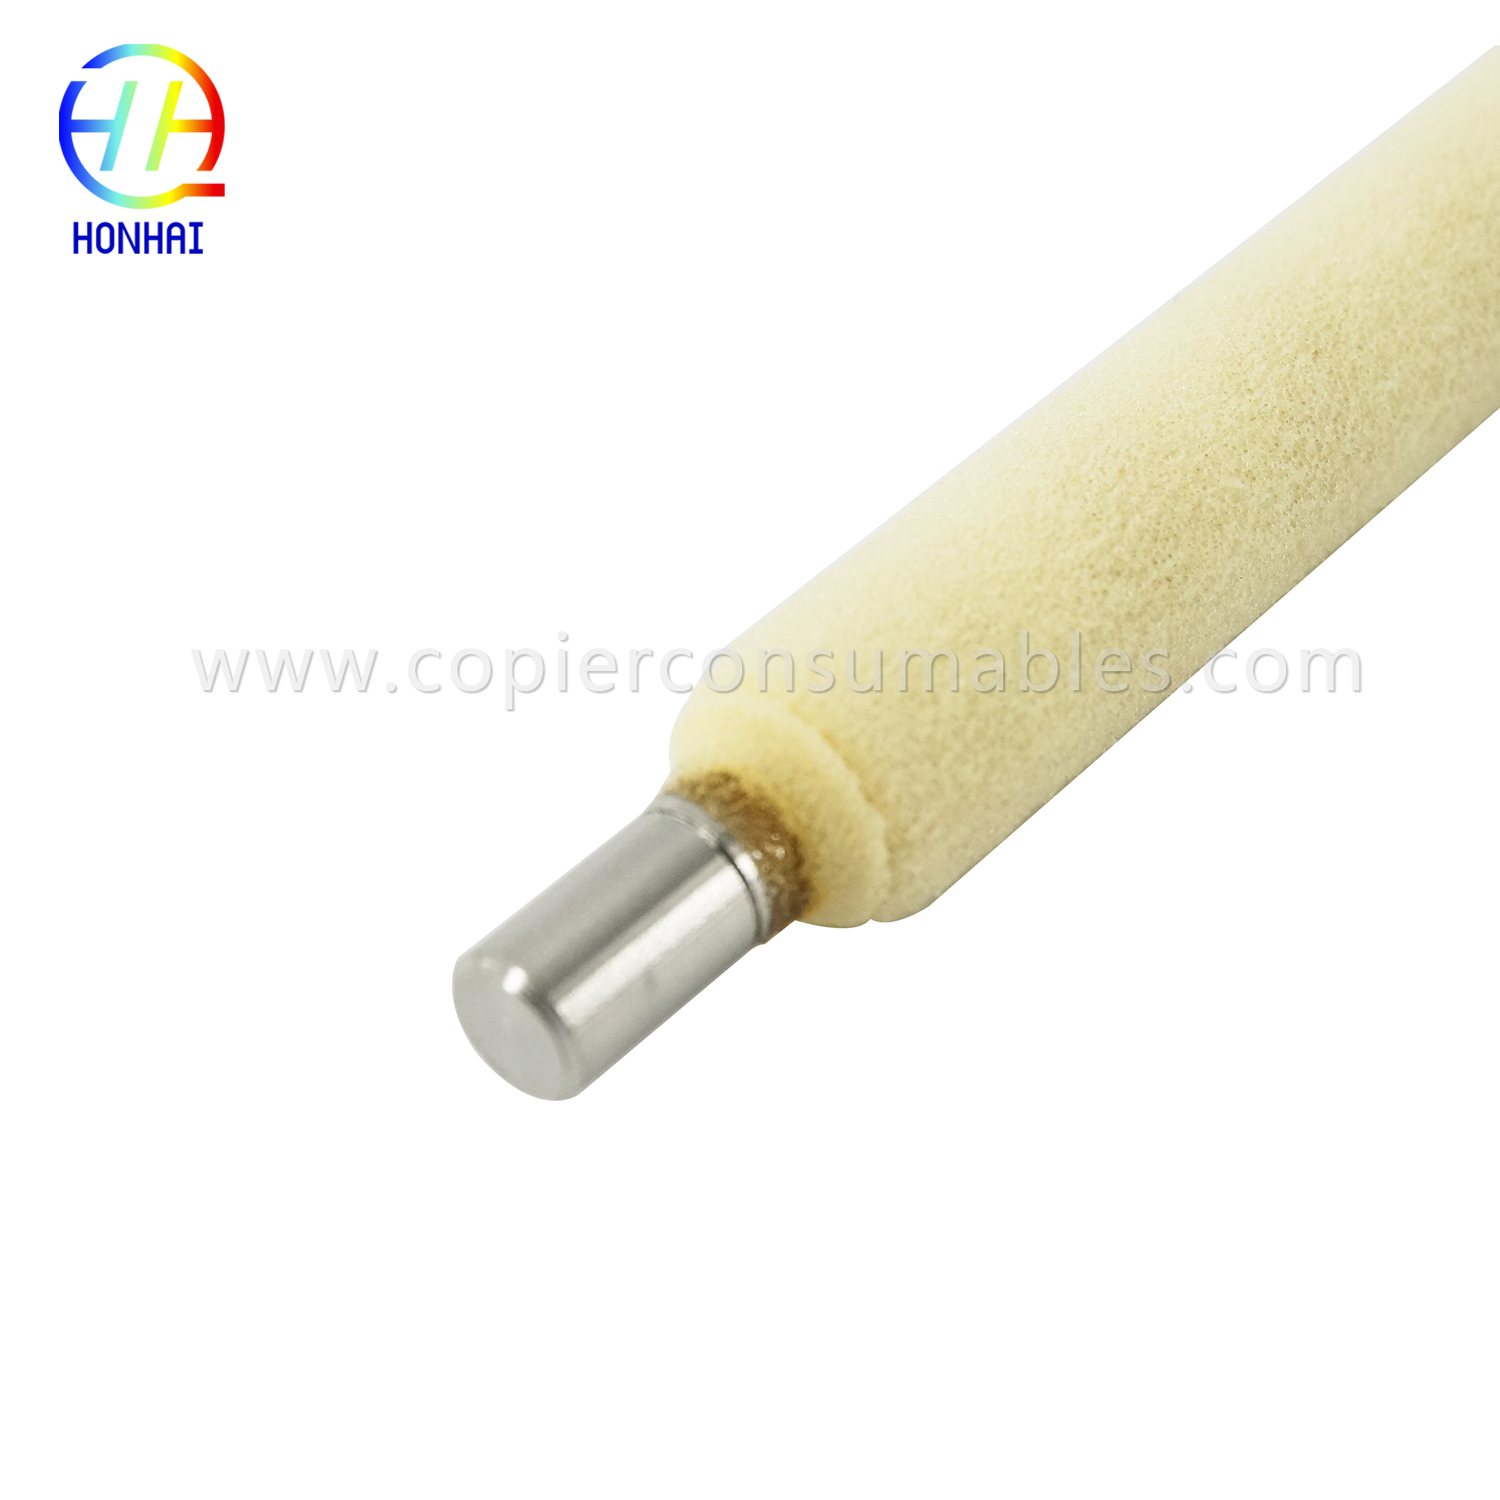 PCR Cleaning roller Para sa Canon IR ADVANCE C5030 C5035 C5045 C5051 C5235 C5240 C5250 C5255 C3325 C3325i 3330i 3320 3320L 3320i (14) 拷贝